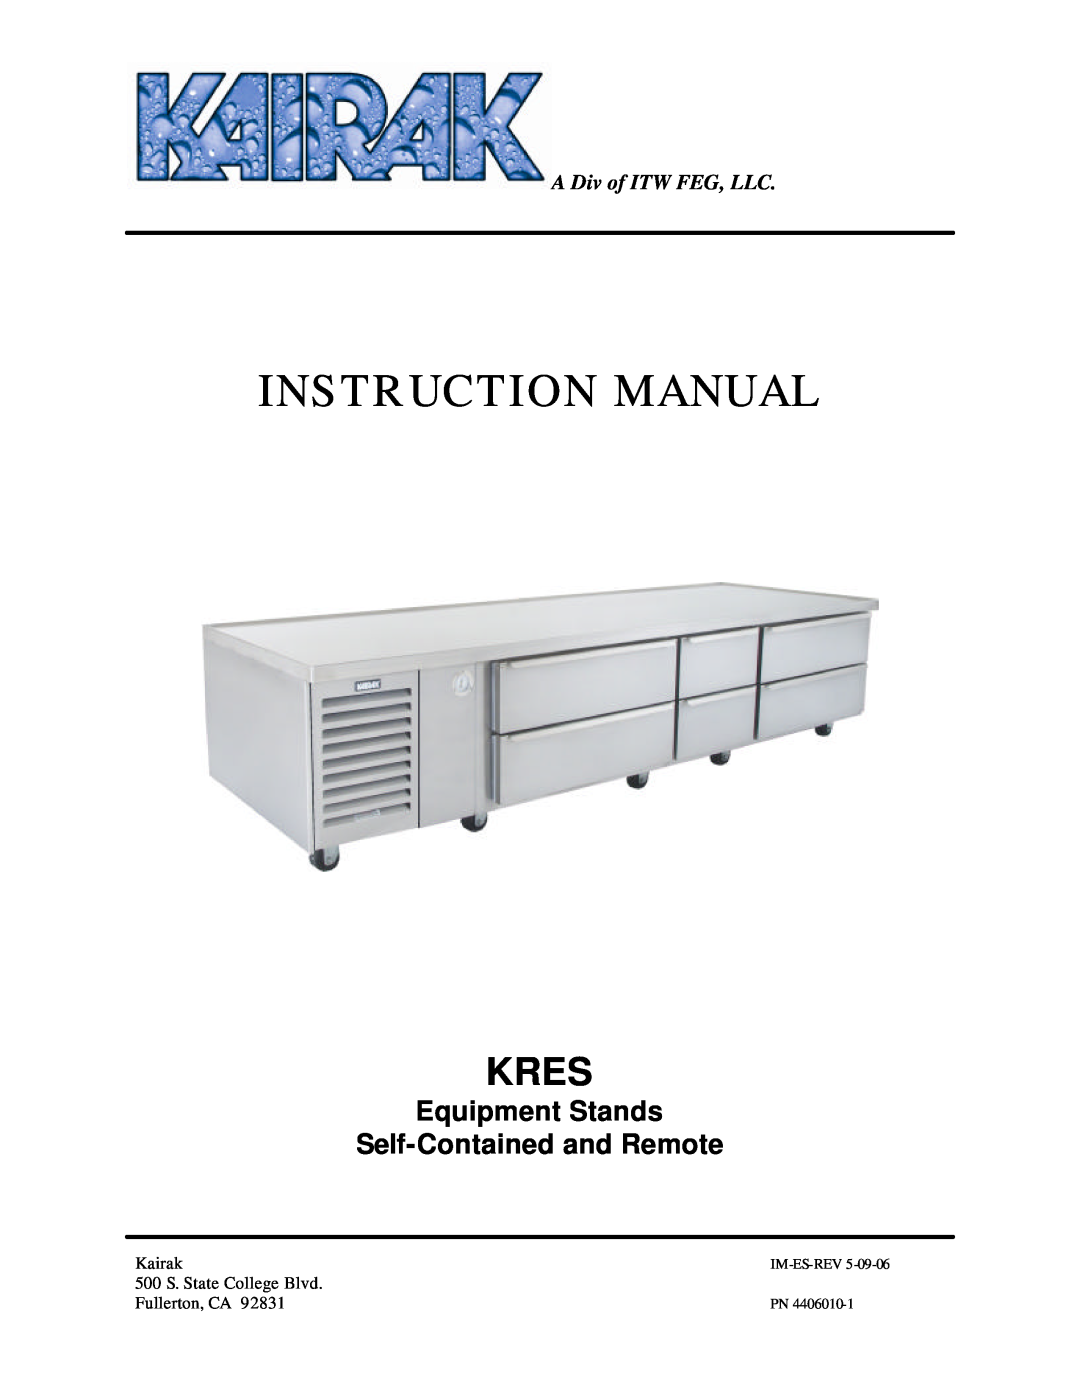 Kairak KRES instruction manual Equipment Stands Self-Contained and Remote, A Div of ITW FEG, LLC, Kres, Kairak, Im-Es-Rev 